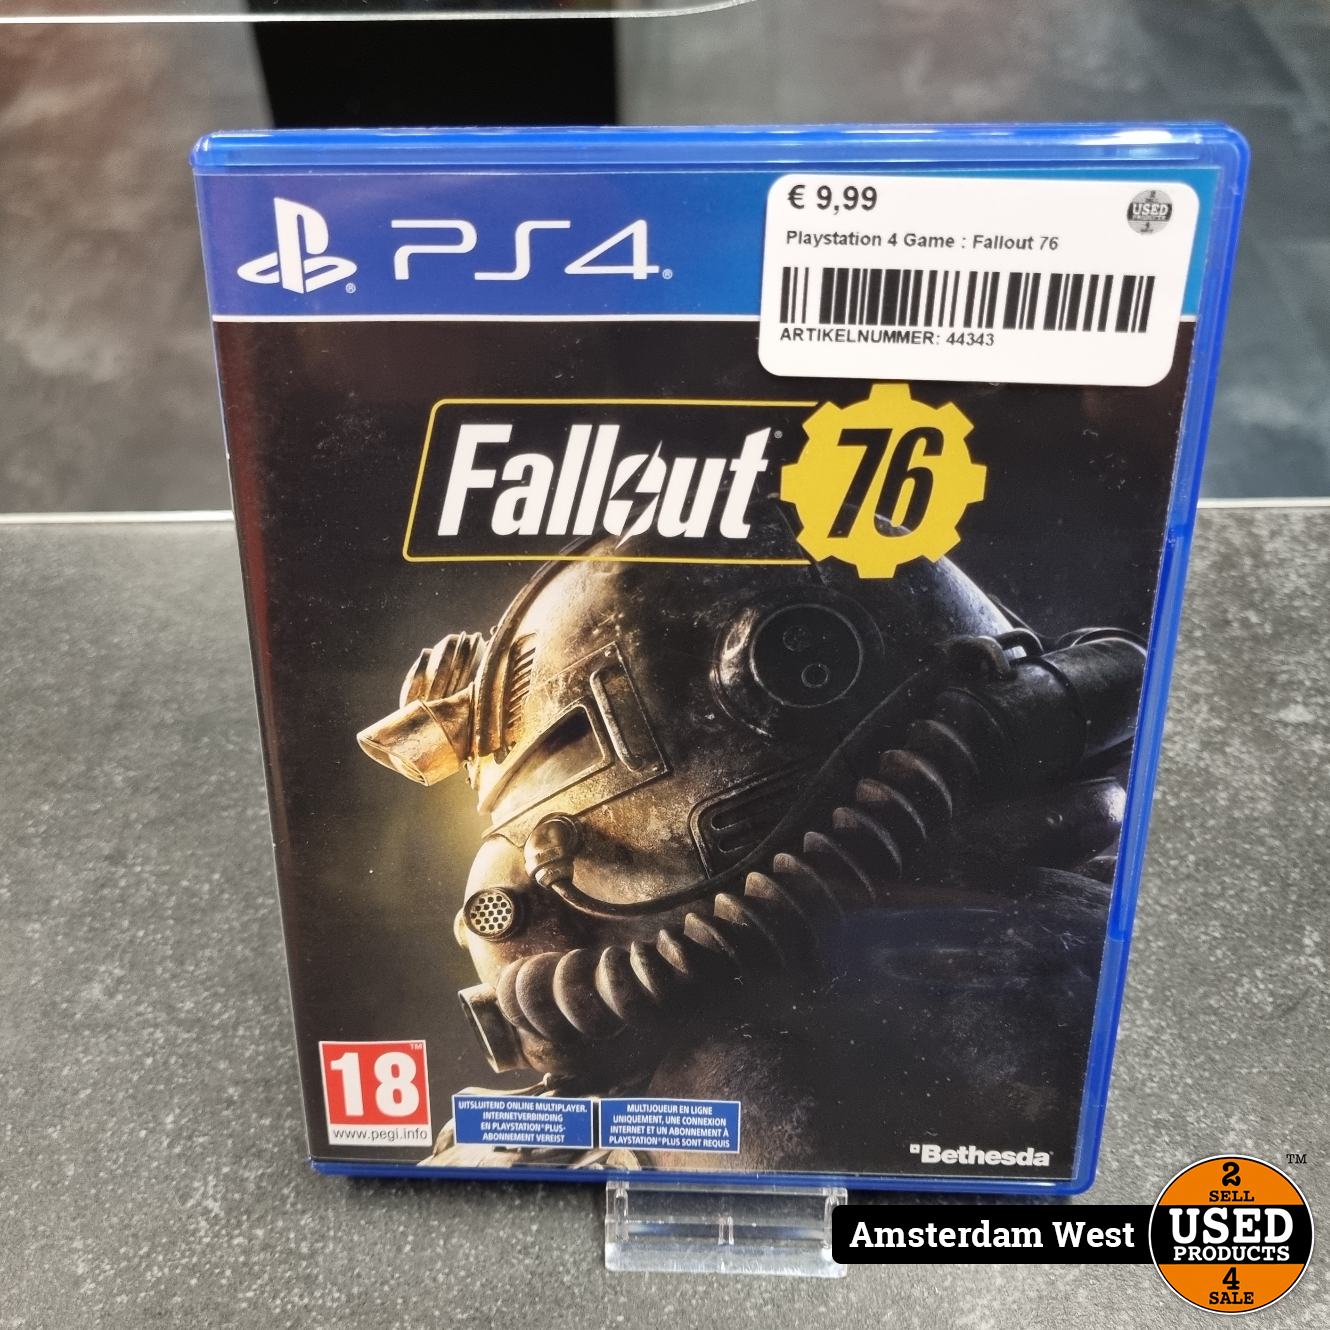 4 Game Fallout 76 Used Products Amsterdam